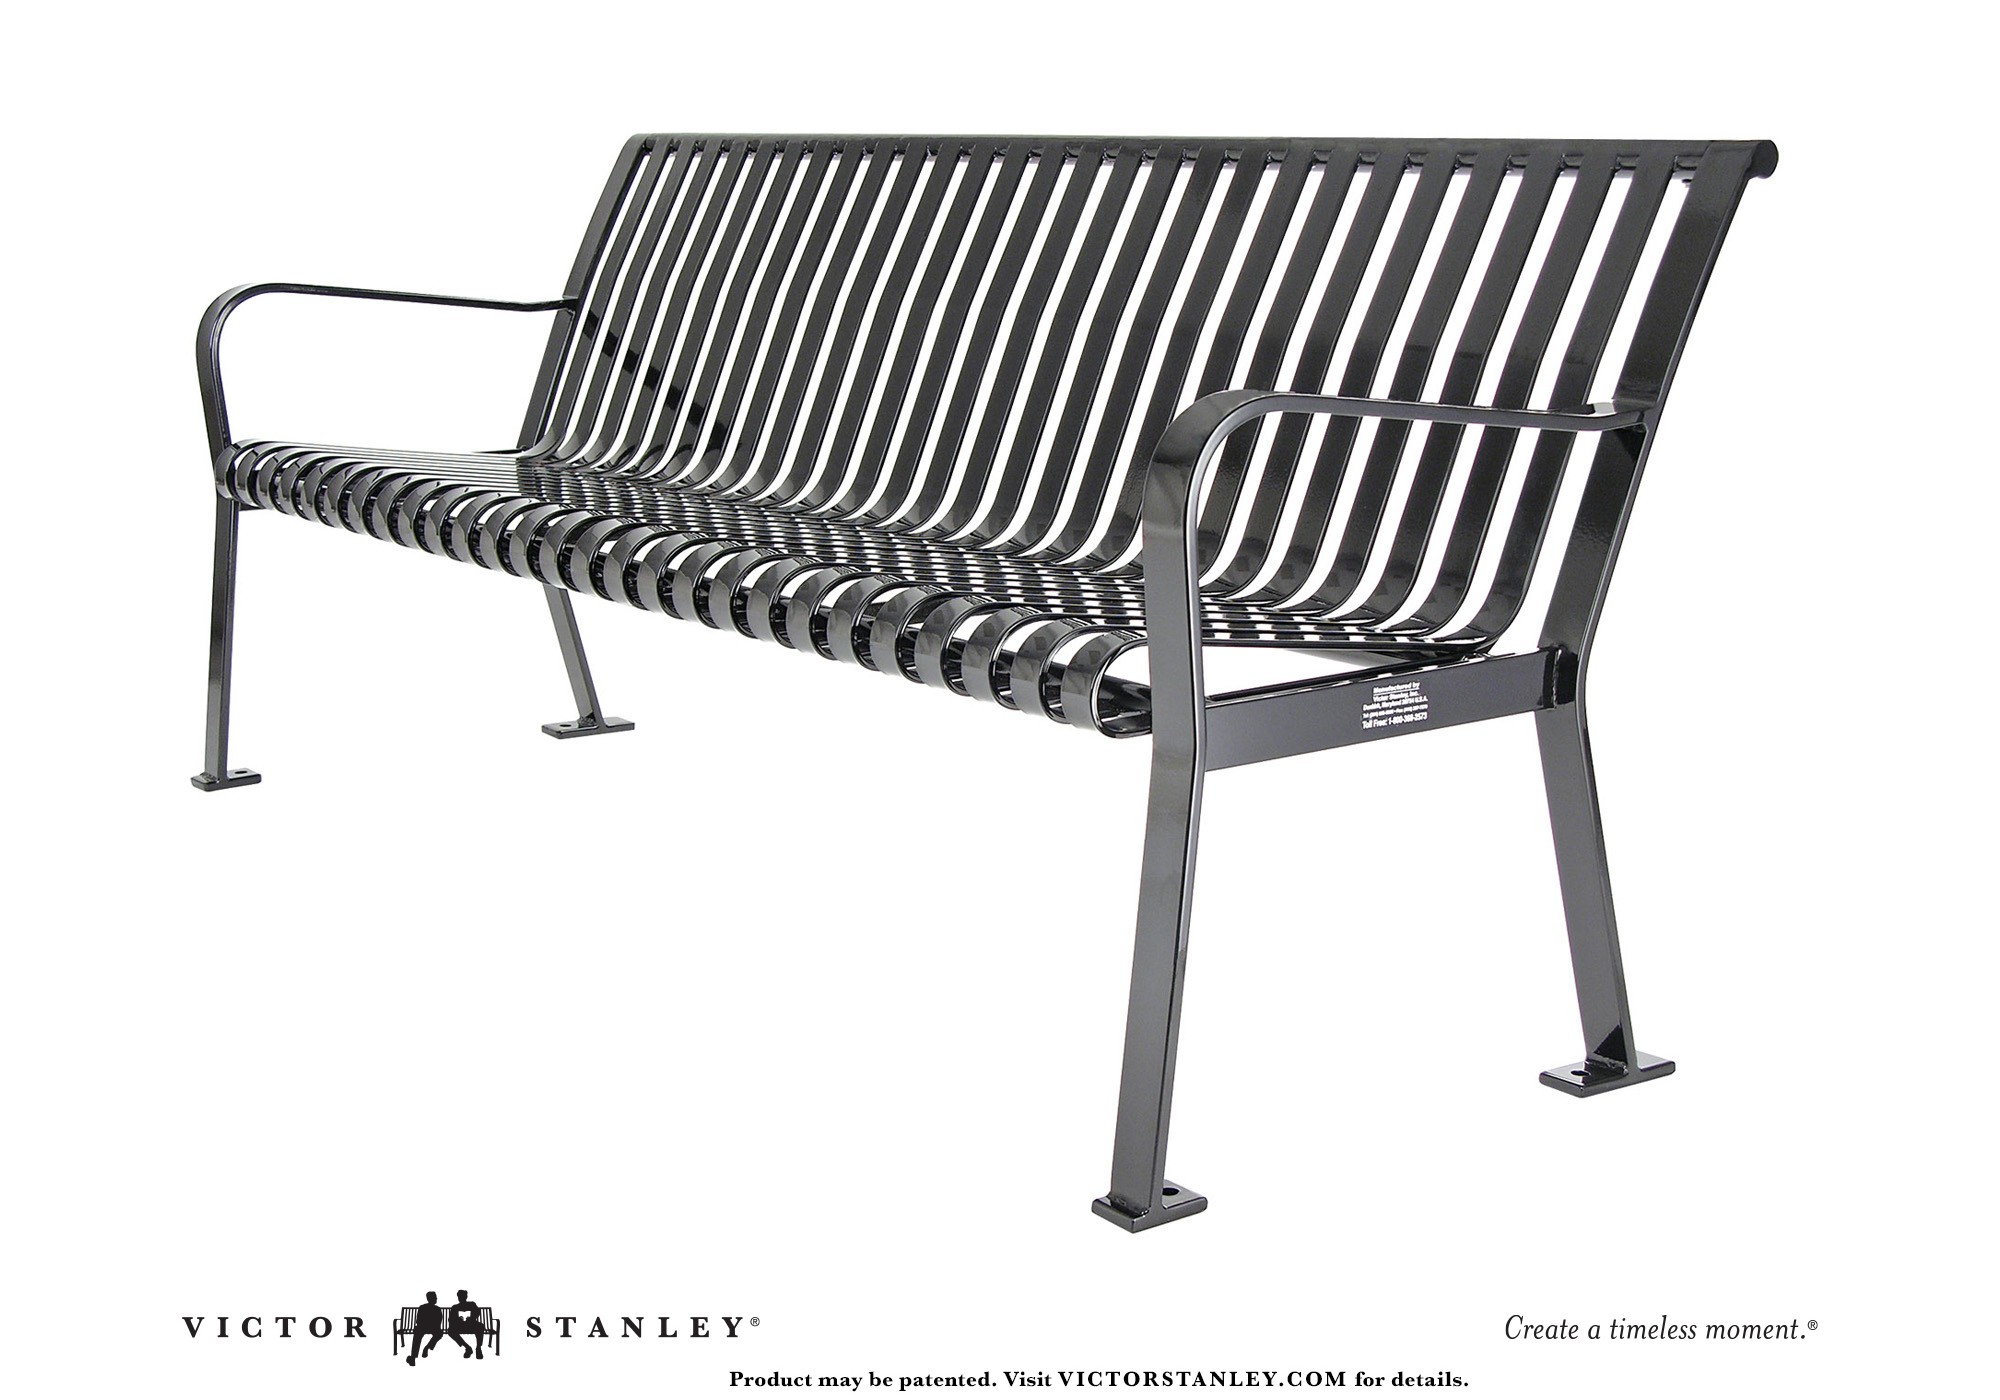 Victor Stanley Bench Rb 28 Price